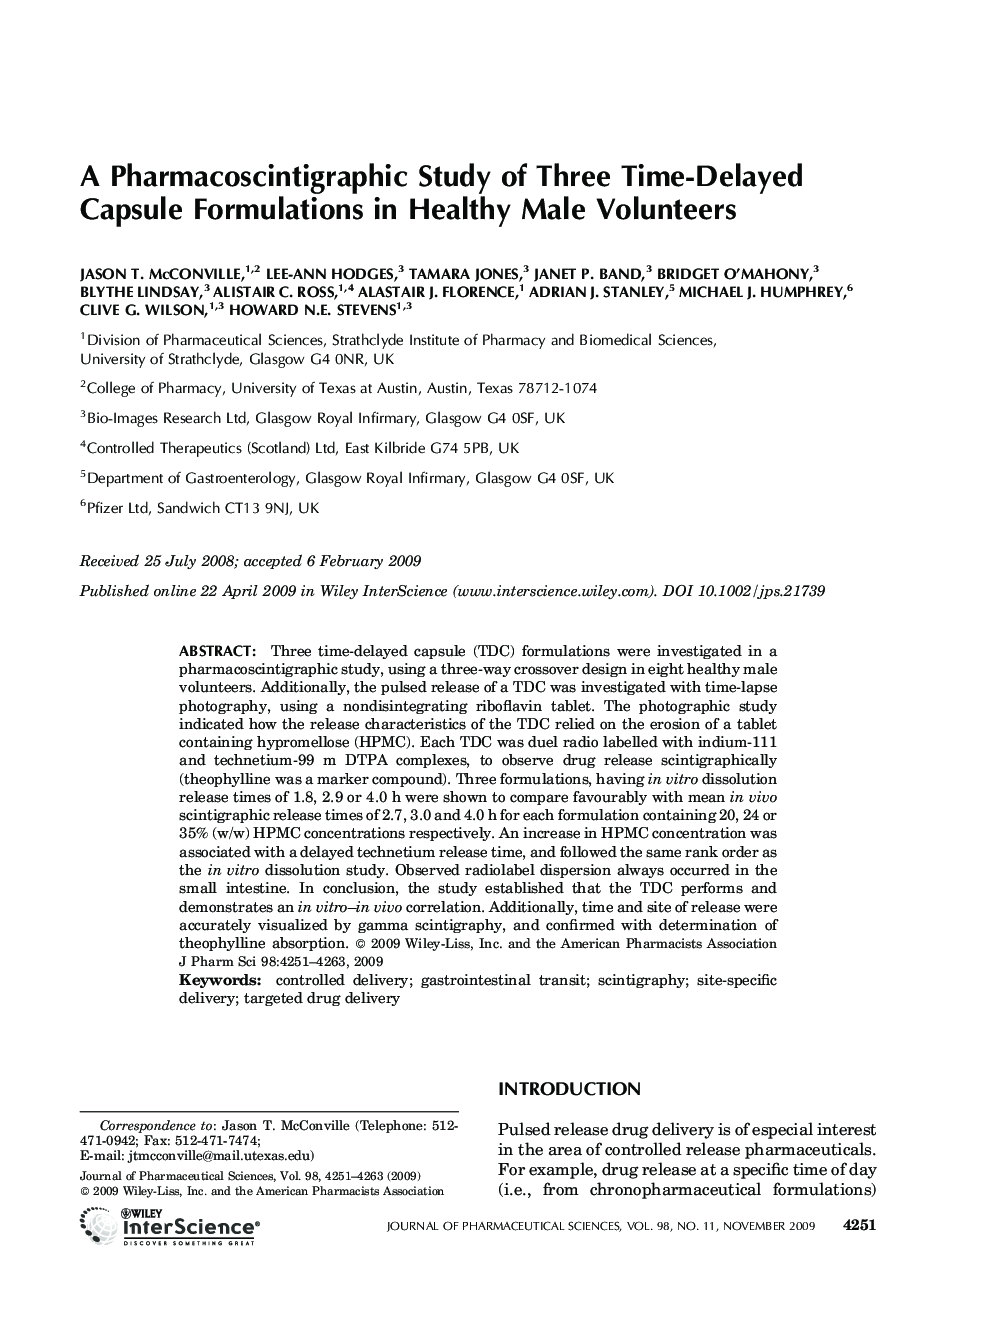 A pharmacoscintigraphic study of three time-delayed capsule formulations in healthy male volunteers